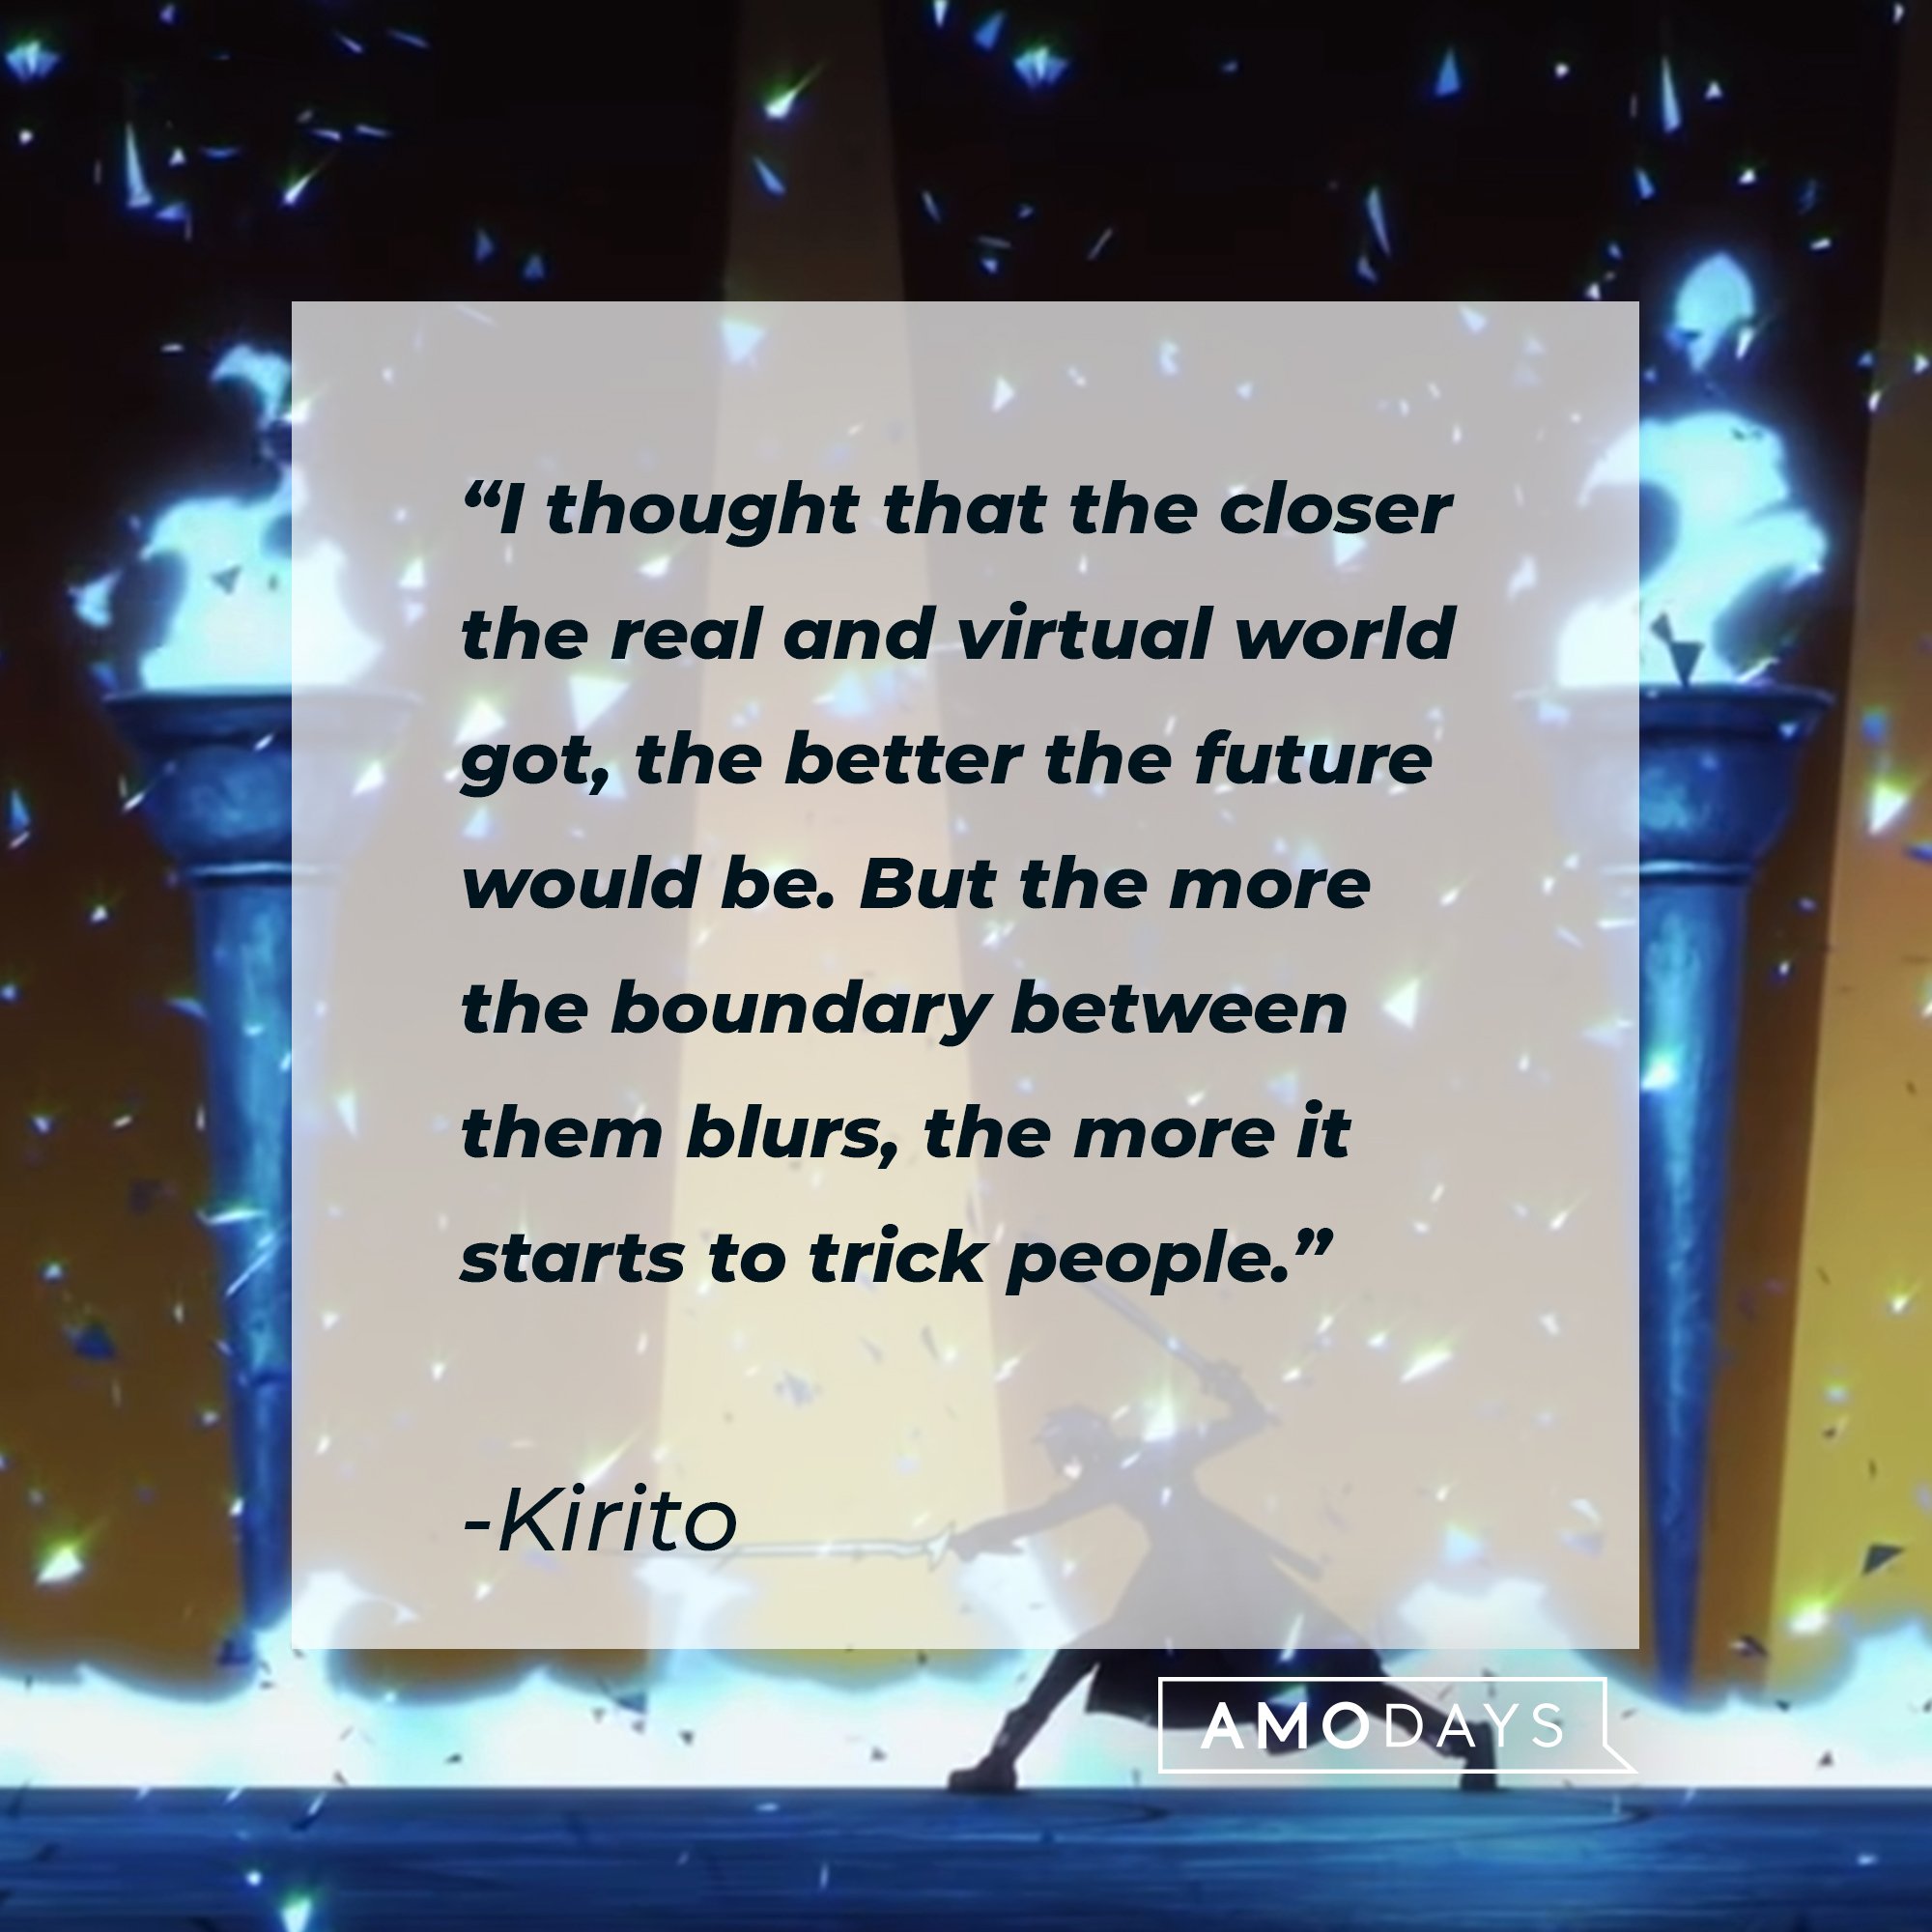 Kirito’s quote: “I thought that the closer the real and virtual world got, the better the future would be. But the more the boundary between them blurs, the more it starts to trick people.” | Image: AmoDays